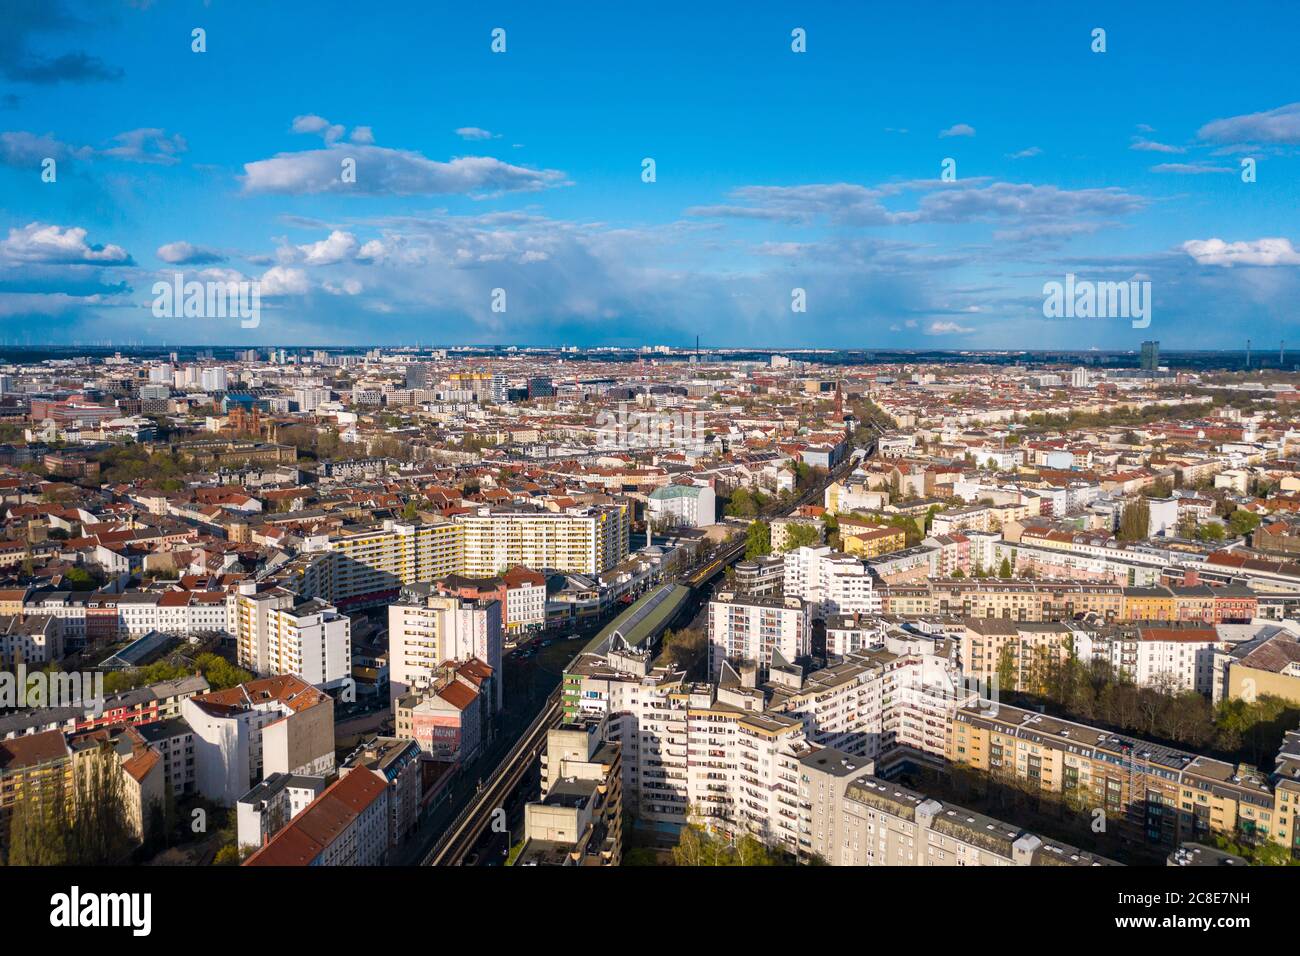 Germany, Berlin, Aerial view of Kottbusser Tor station and surrounding buildings Stock Photo